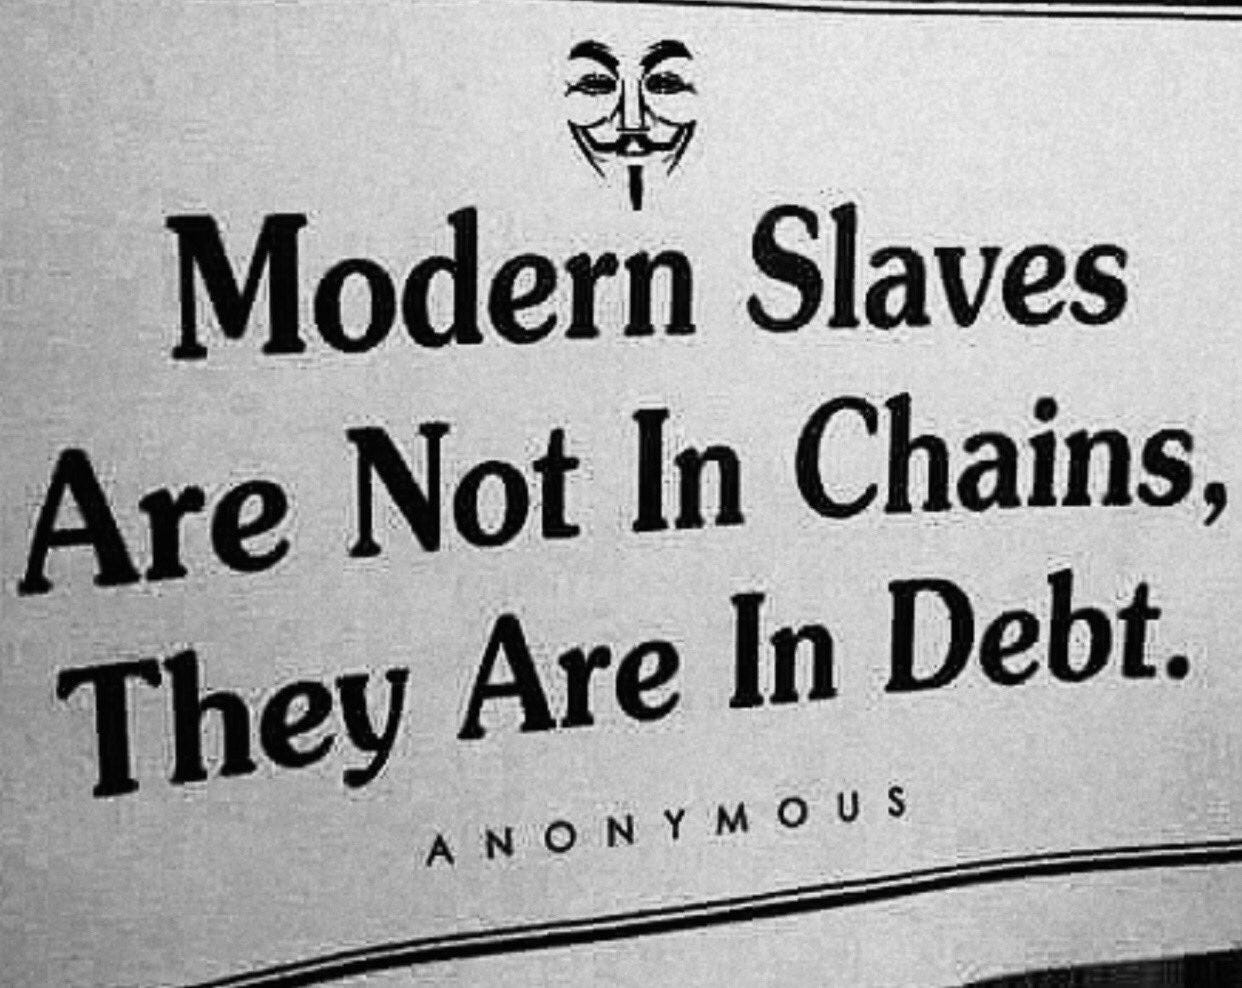 modern slaves are not in chains, they are in debt. : DemocraticSocialism